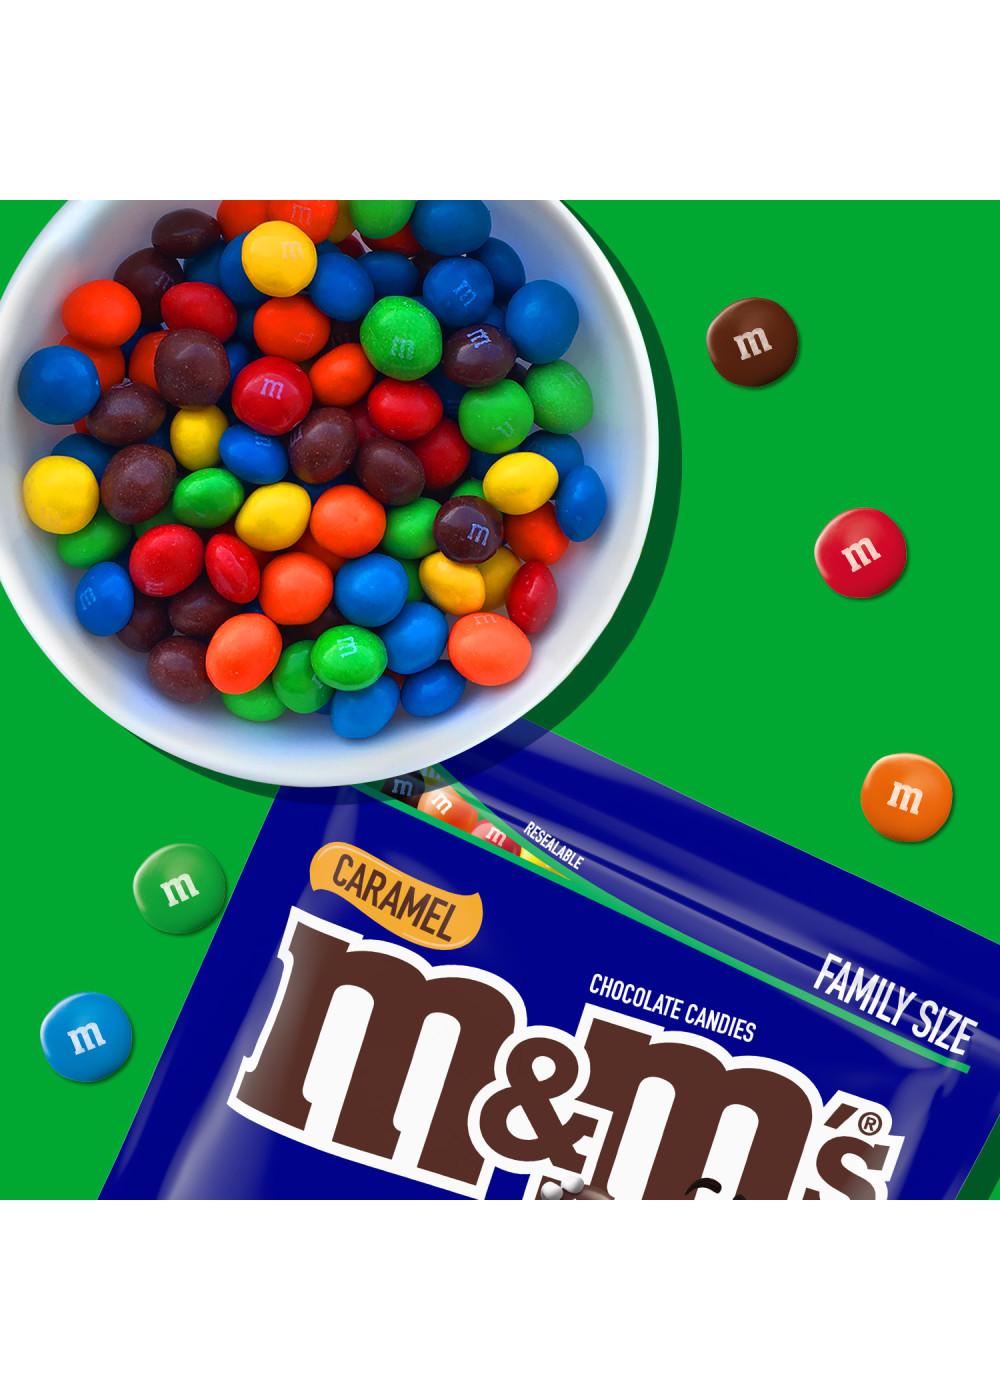 M&M'S Caramel Chocolate Candy - Family Size; image 3 of 3